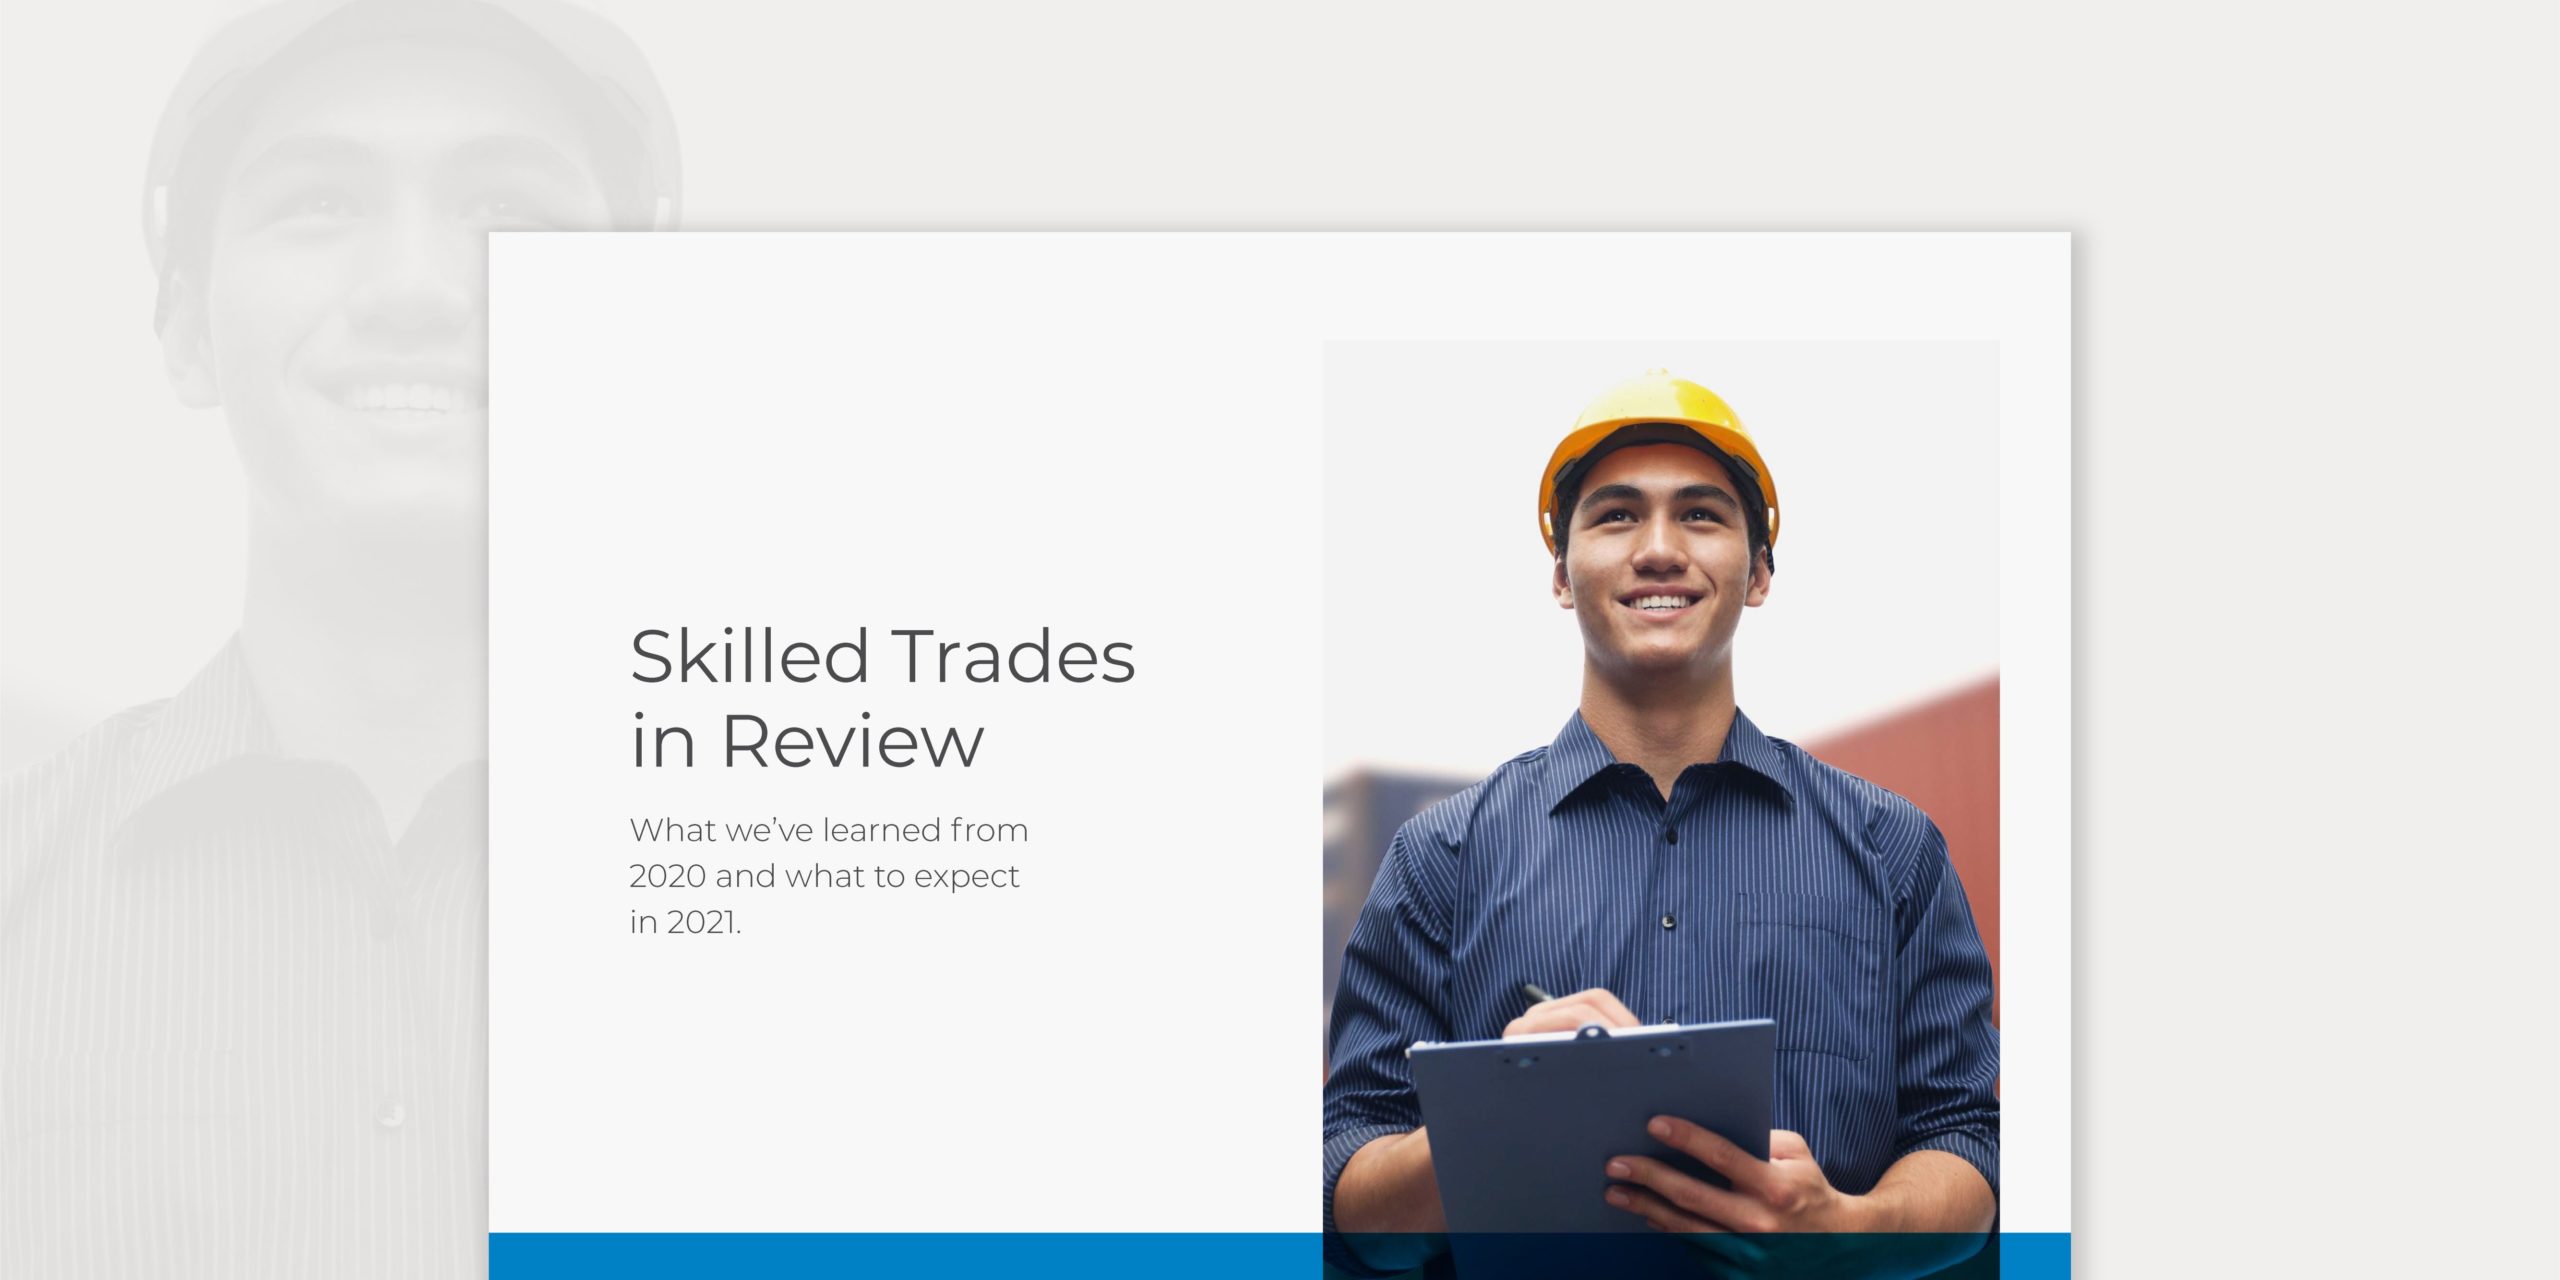 Skilled Trades in Review: What We’ve Learned from 2020 and What to Expect in 2021